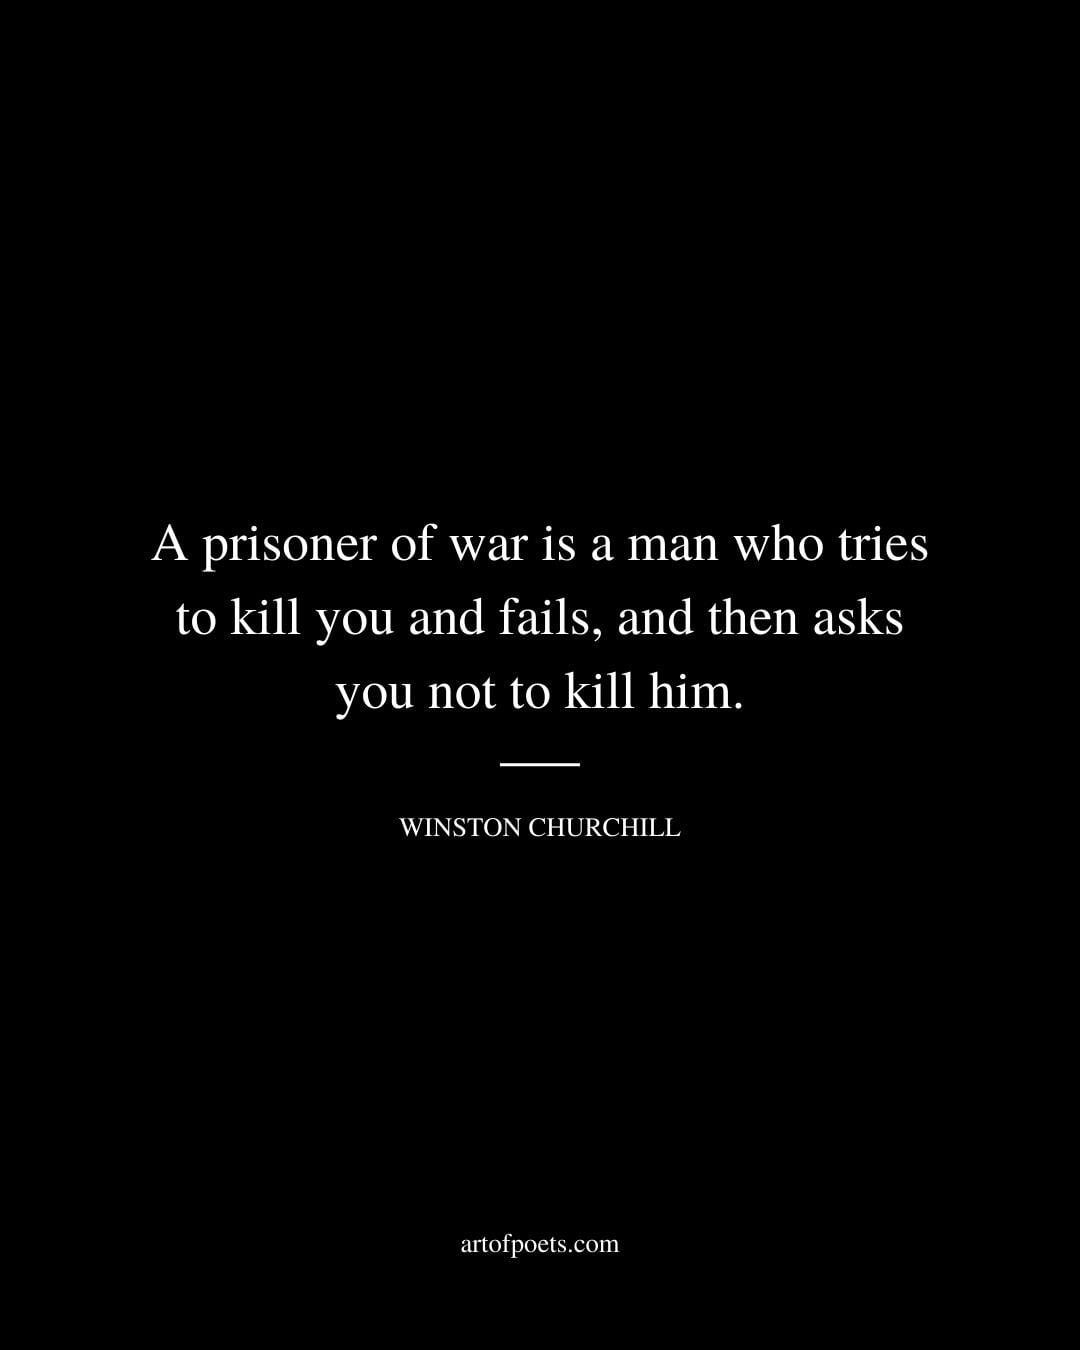 A prisoner of war is a man who tries to kill you and fails and then asks you not to kill him